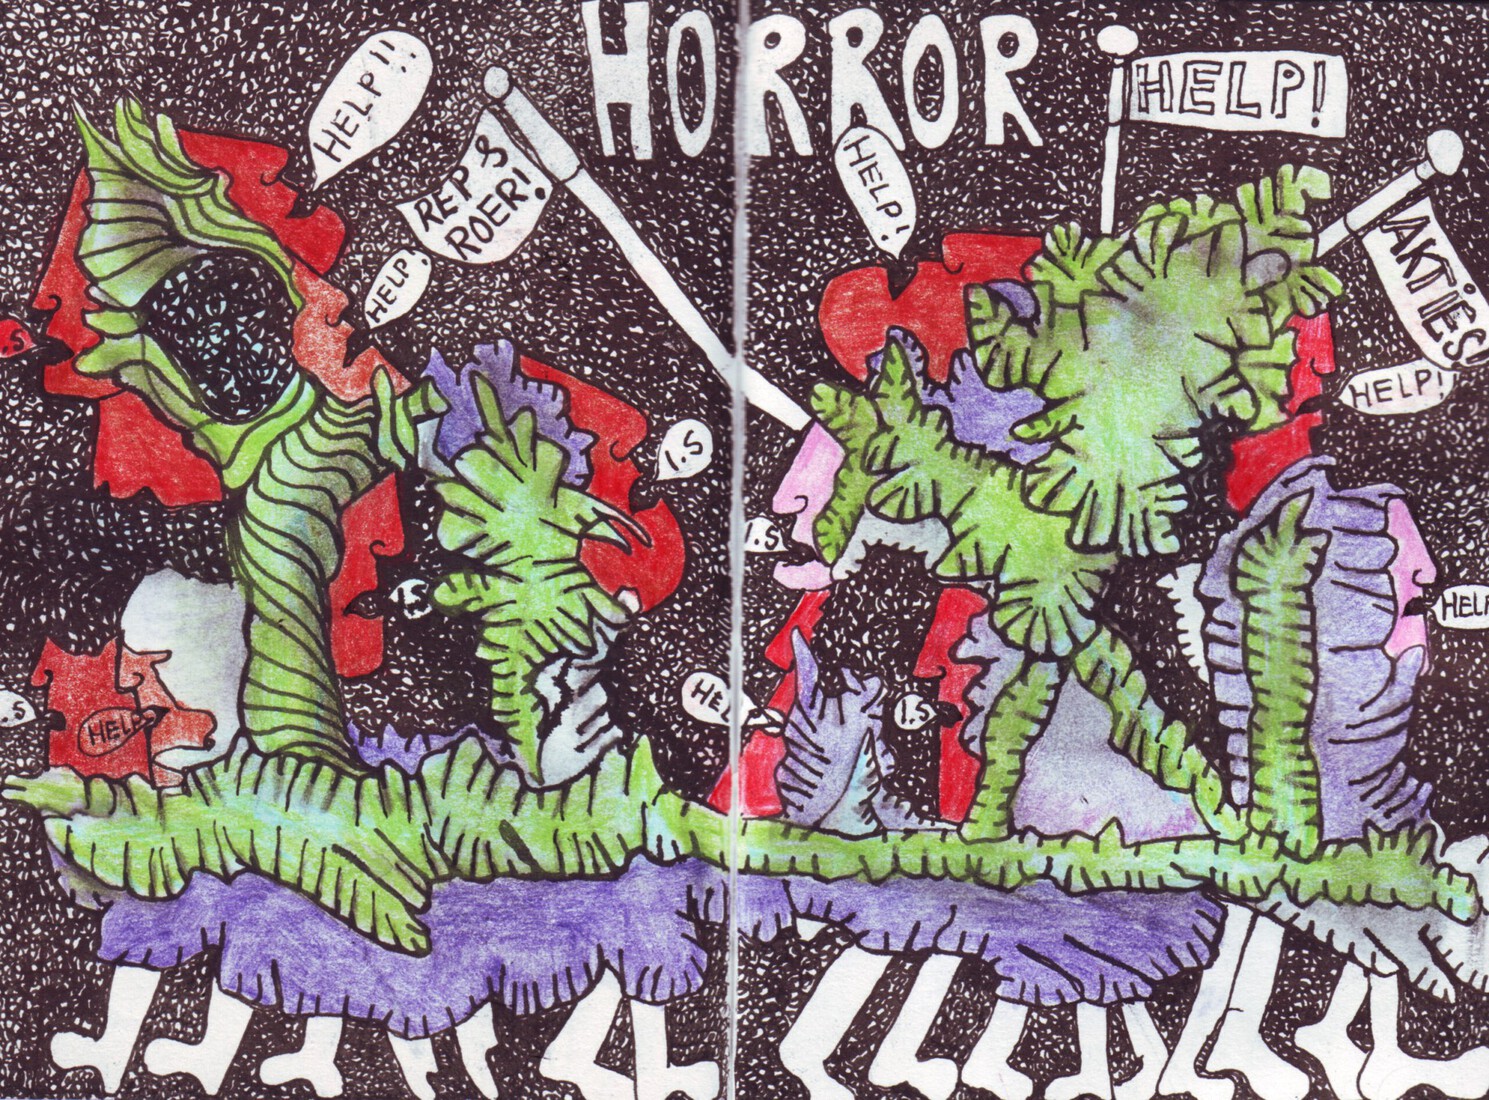 Outsiderart ; Coronacrisis ; They are fighting against a horror script!